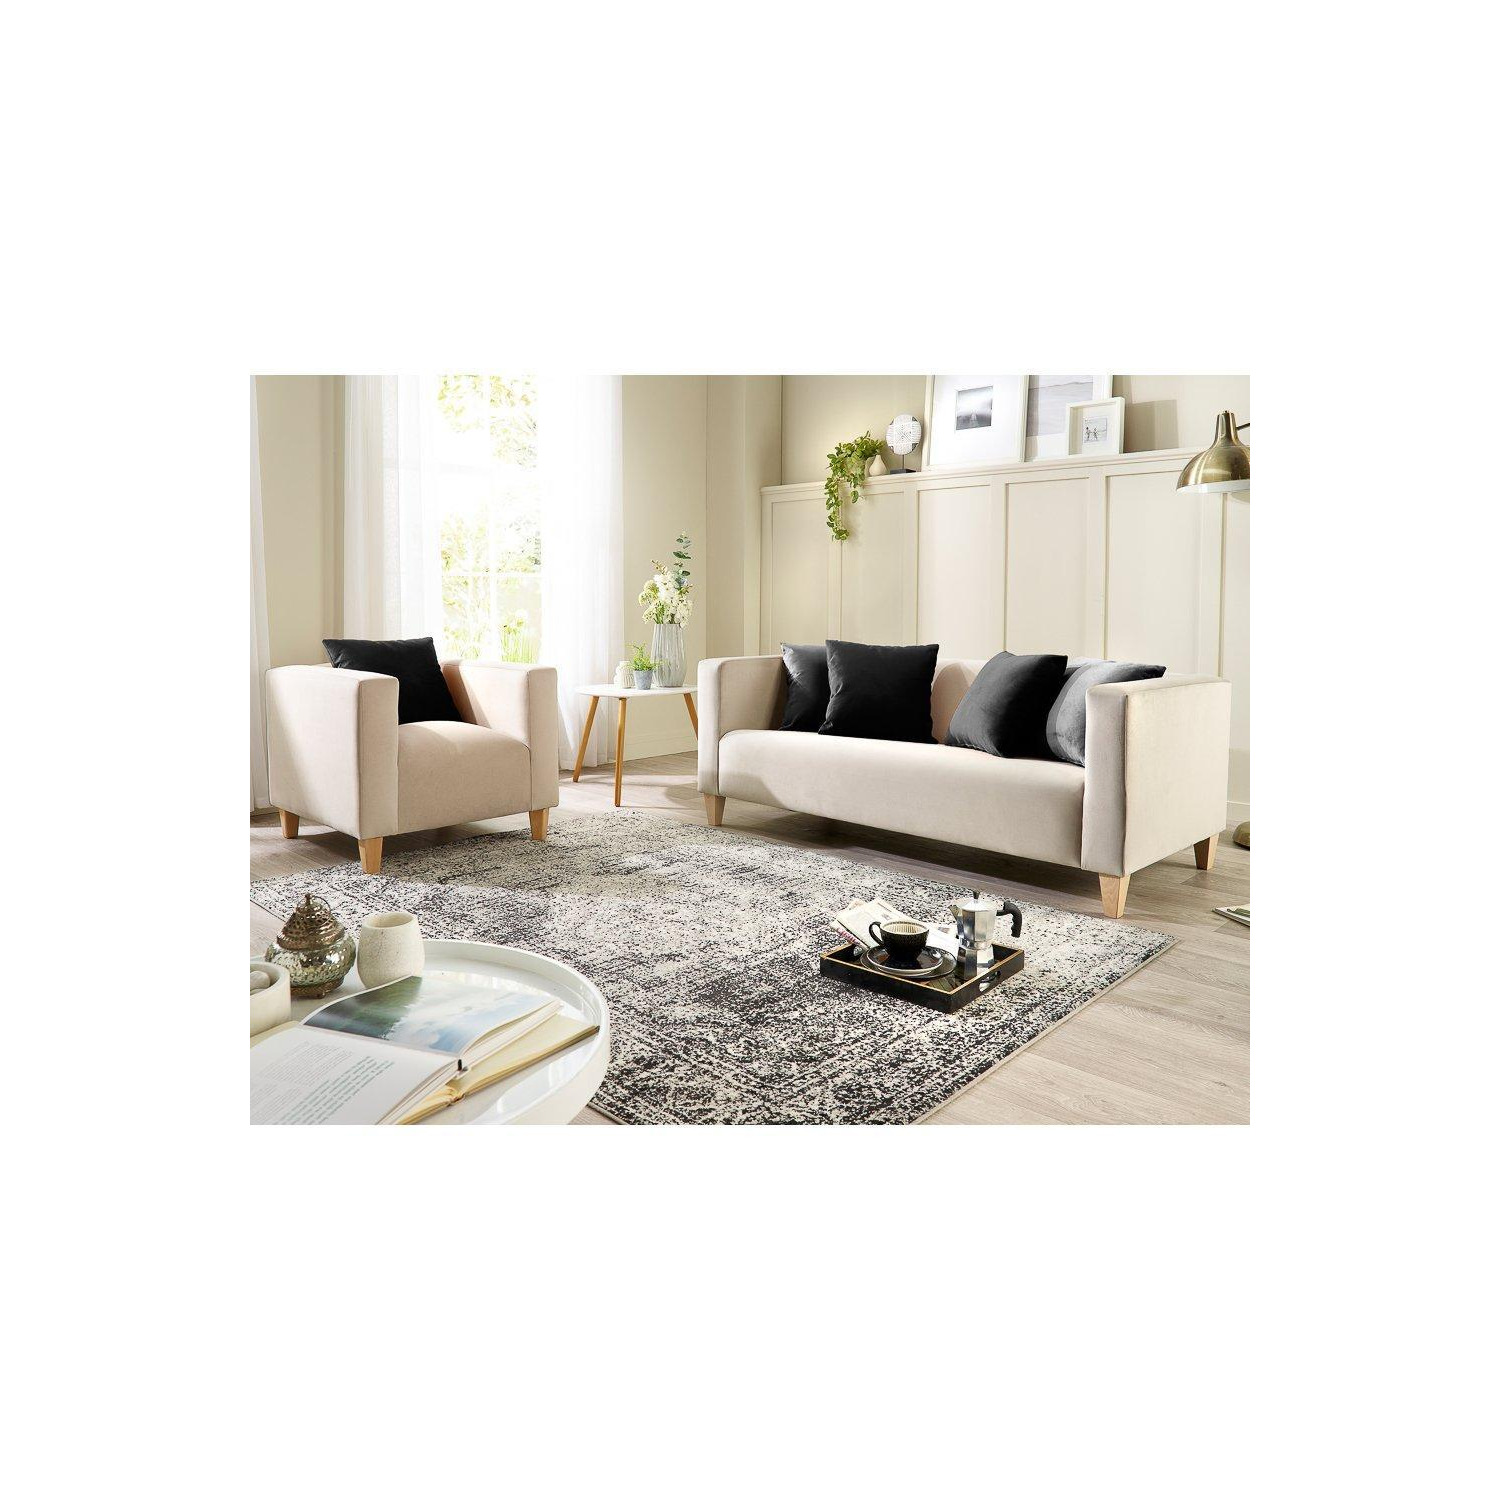 Bonnie 3 Seater & Armchair Set in Brushed Velvet - image 1